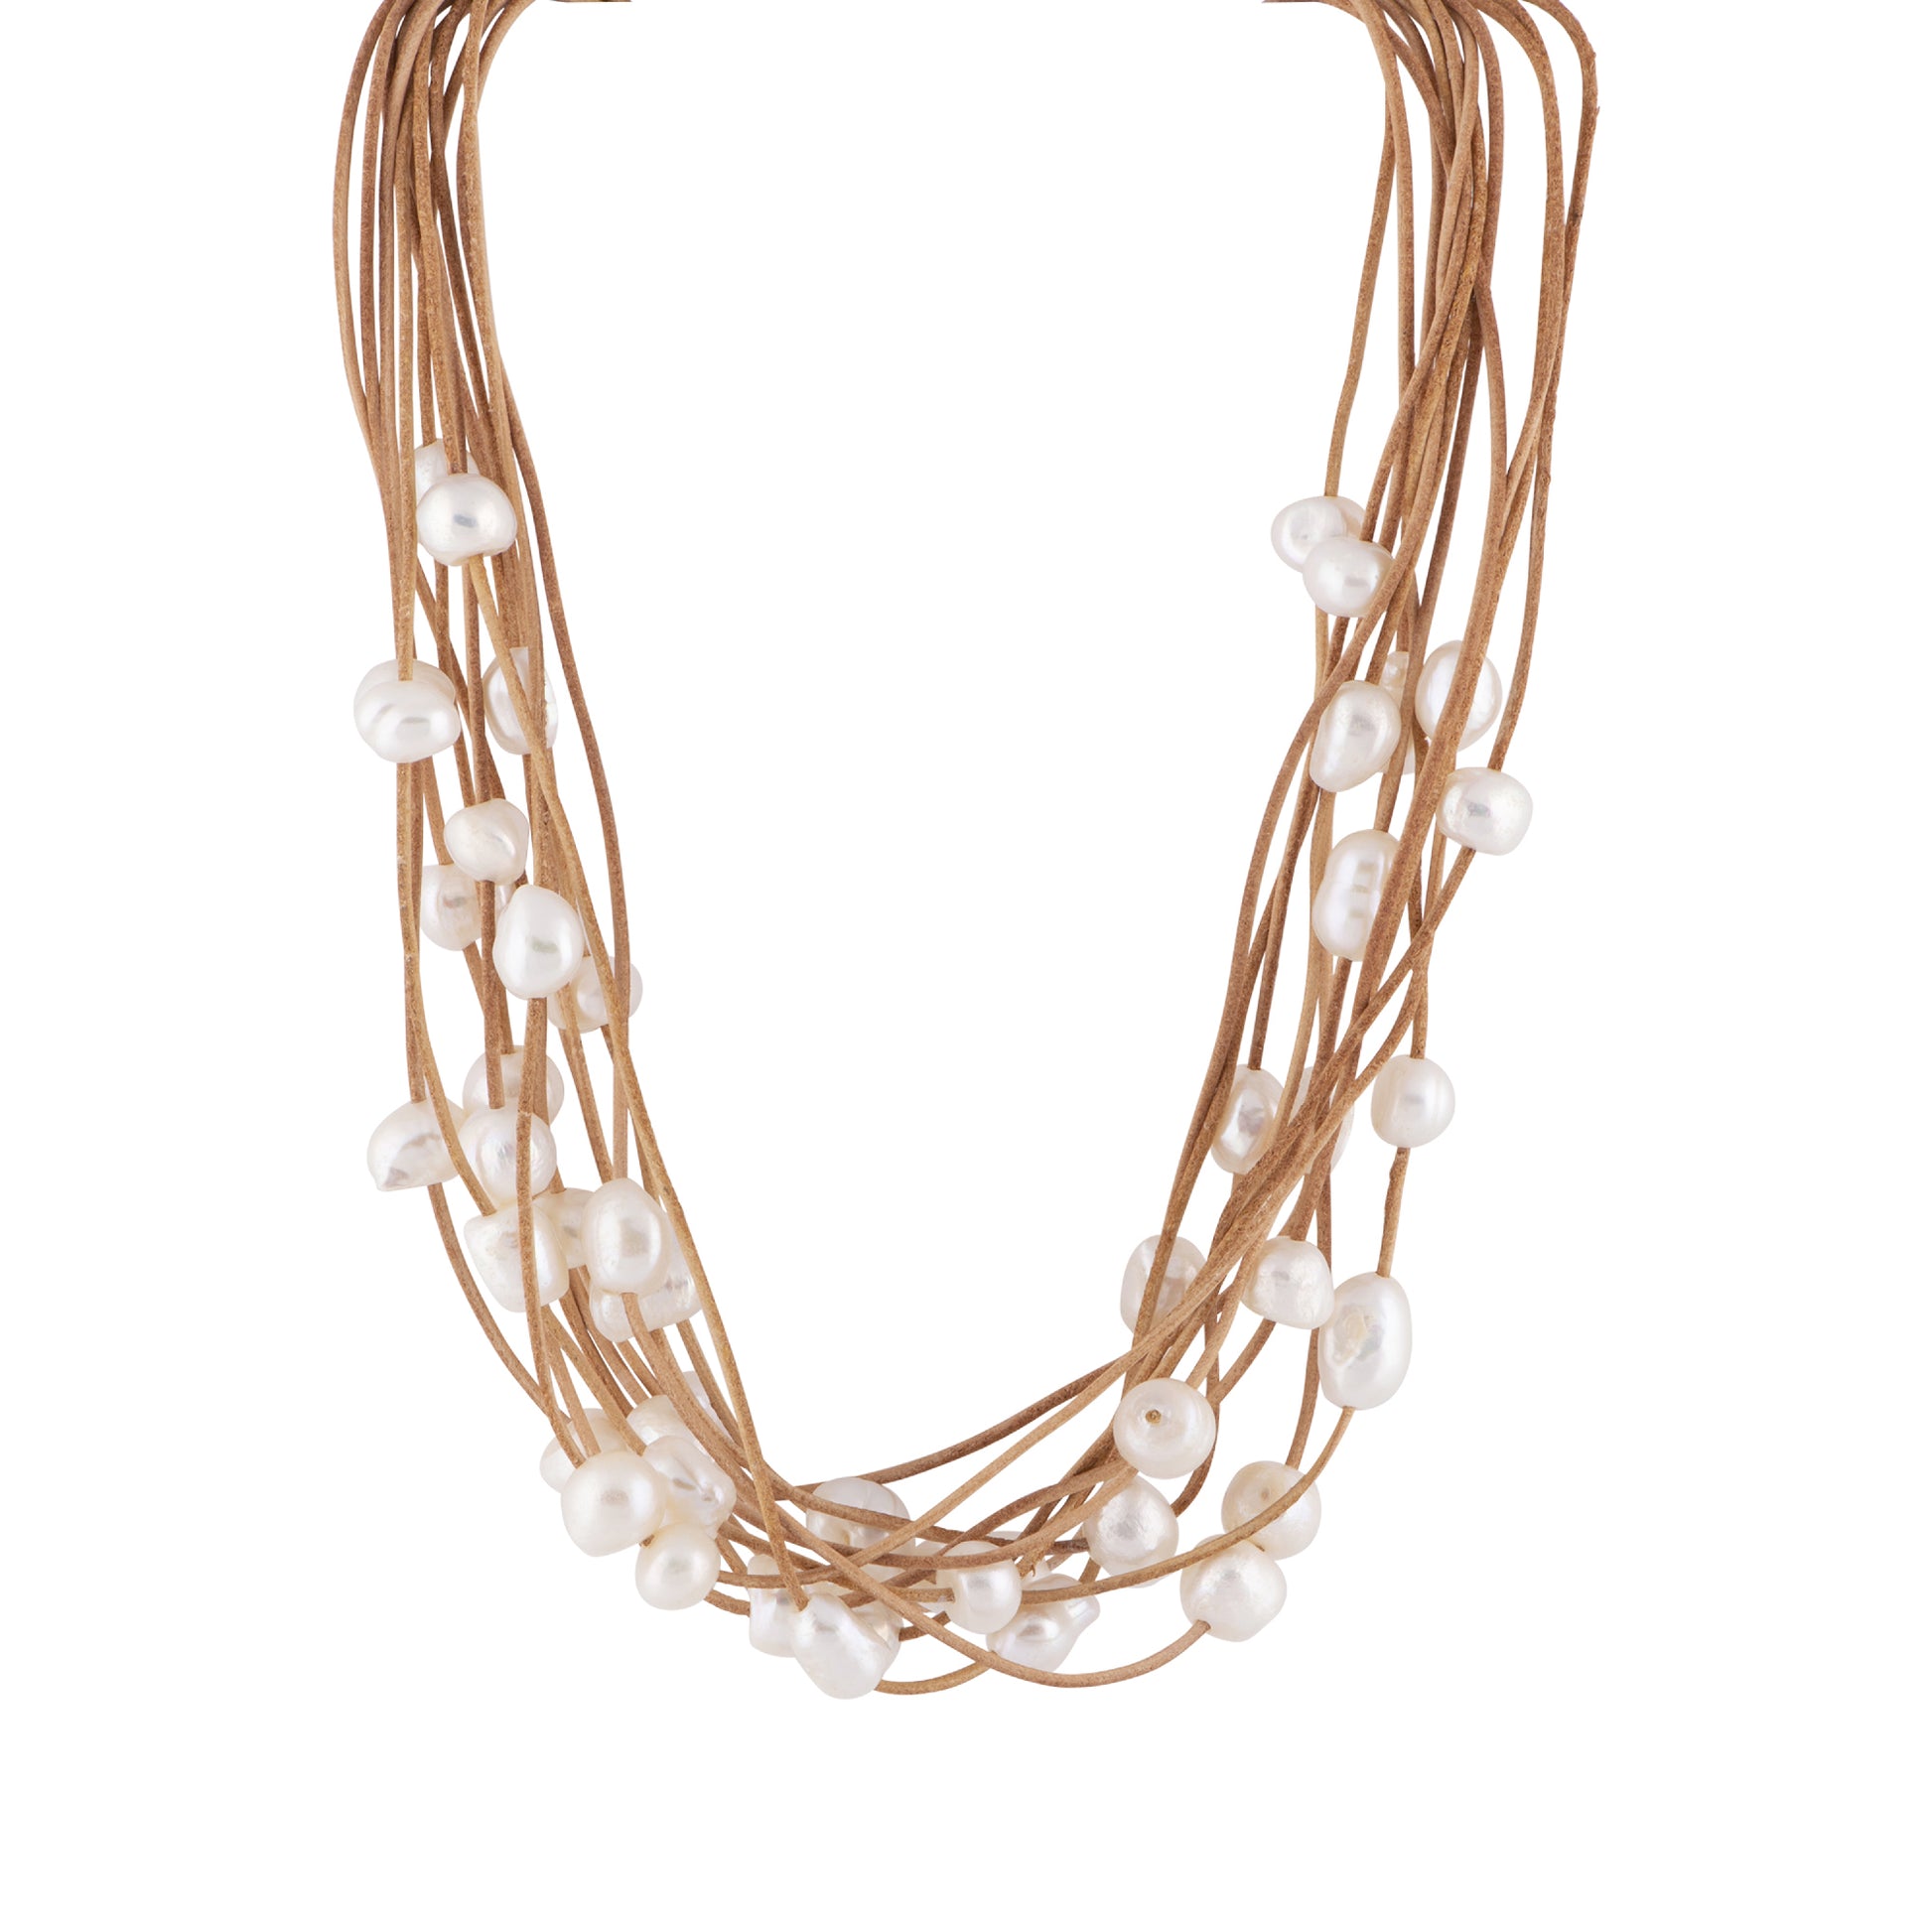 Marrianne - Leather multi-strand freshwater pearl necklace (Tan strand, white pearls)